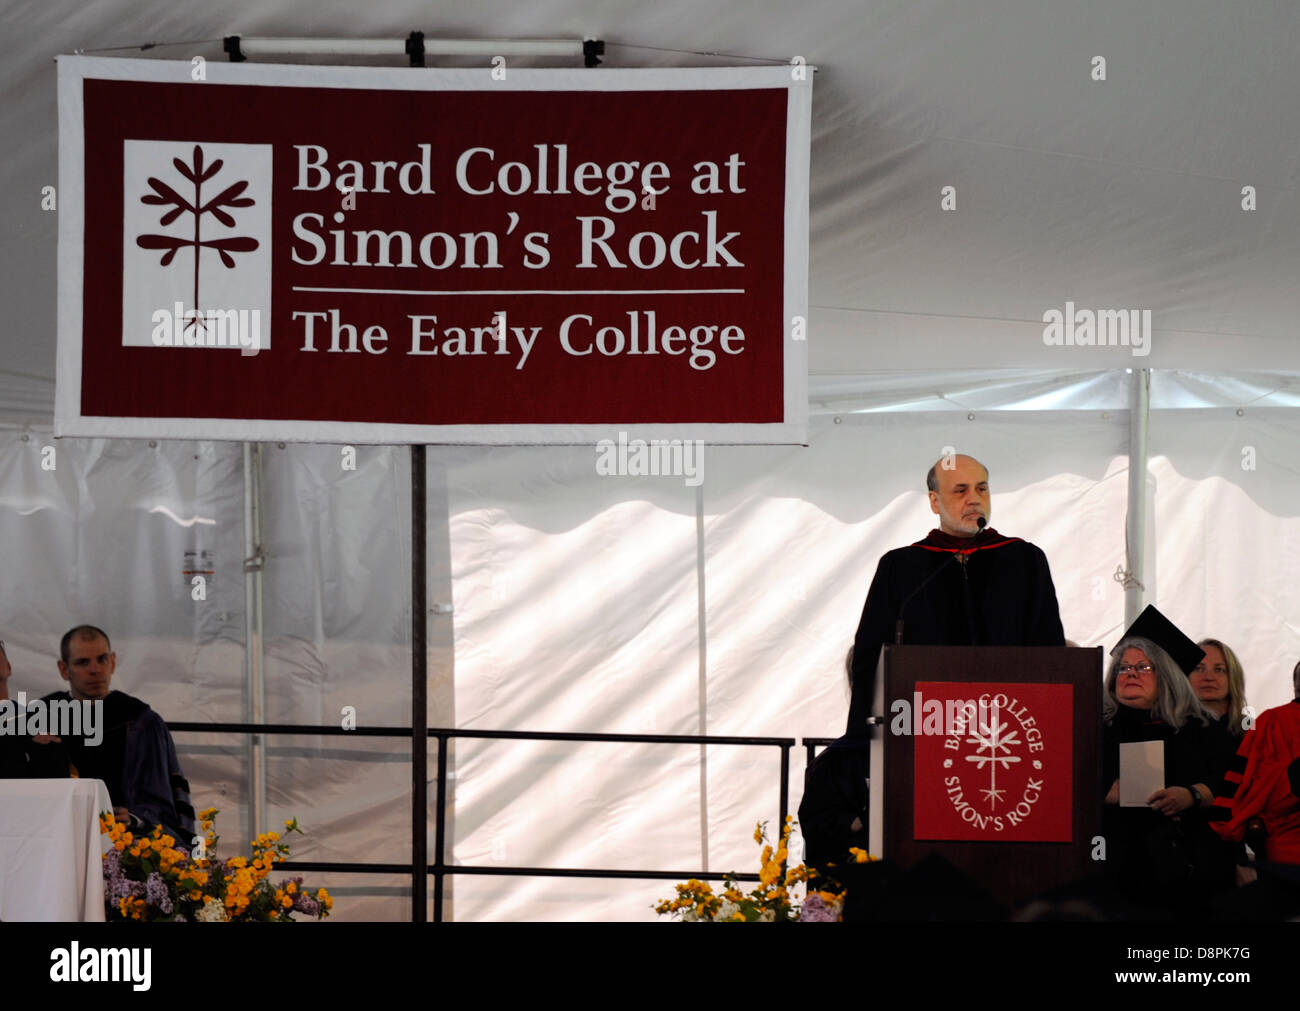 Federal Reserve chairman Ben Bernanke gave the commencement address at 'Bard College at Simons Rock' in Great Barrington, Ma. Stock Photo